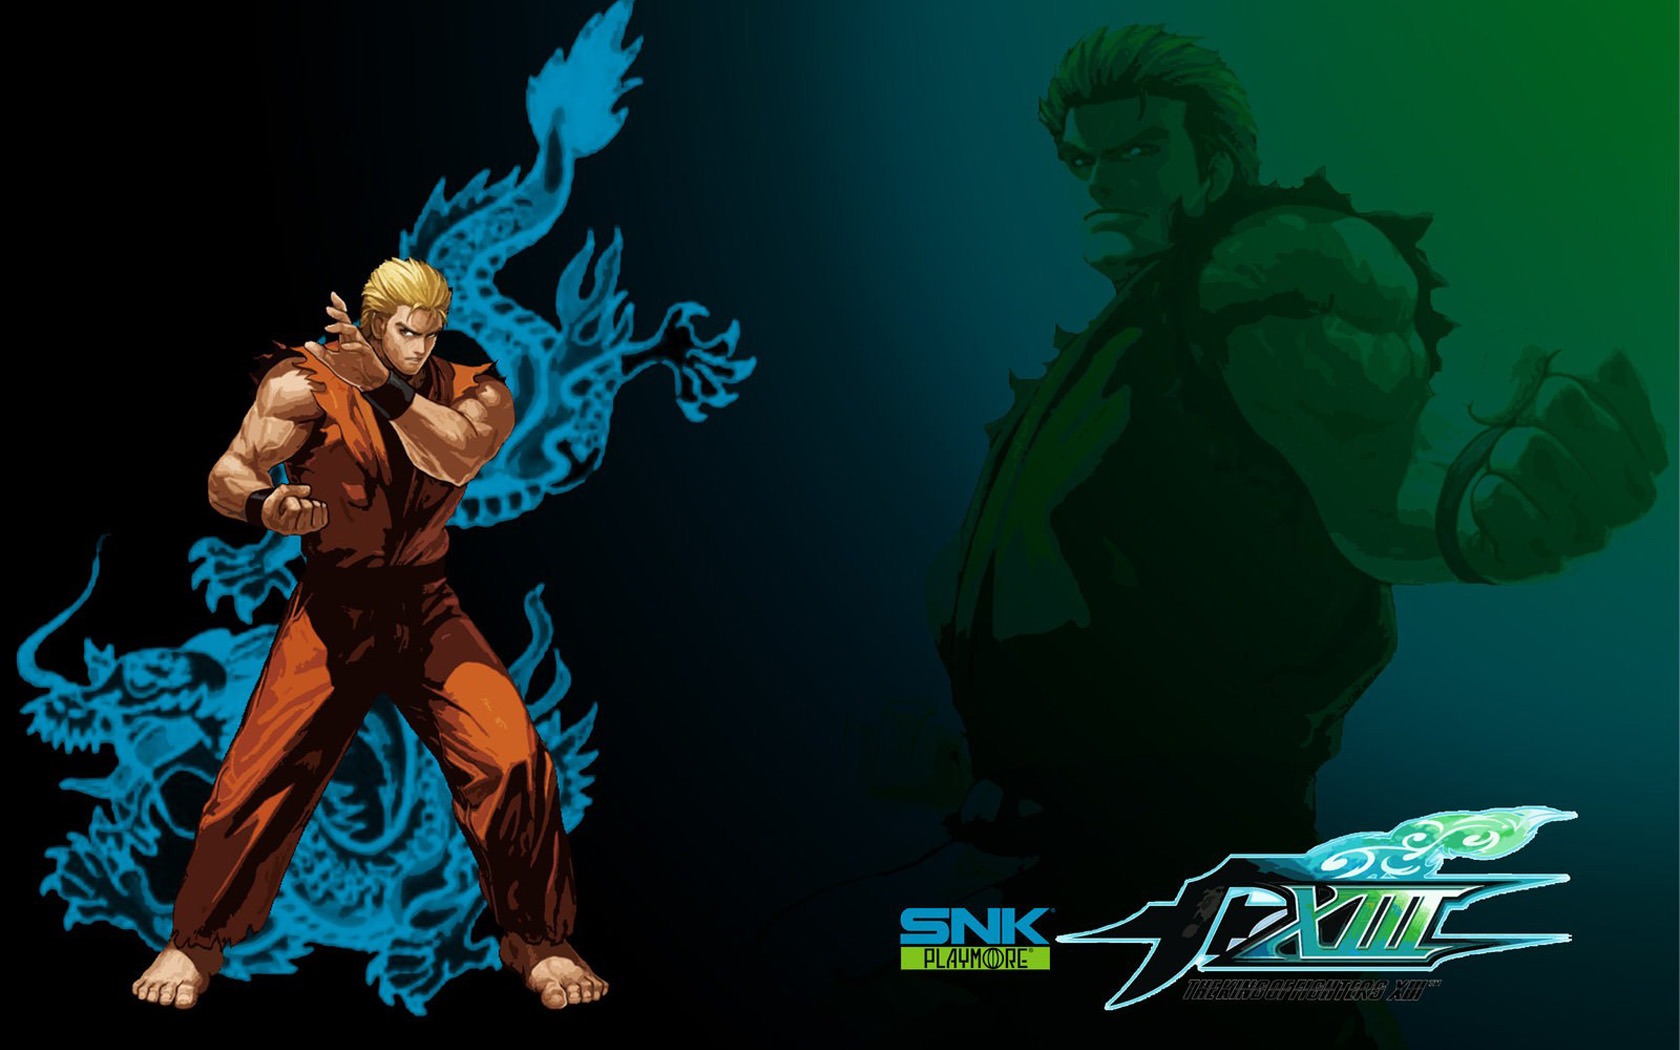 Le roi de wallpapers Fighters XIII #2 - 1680x1050